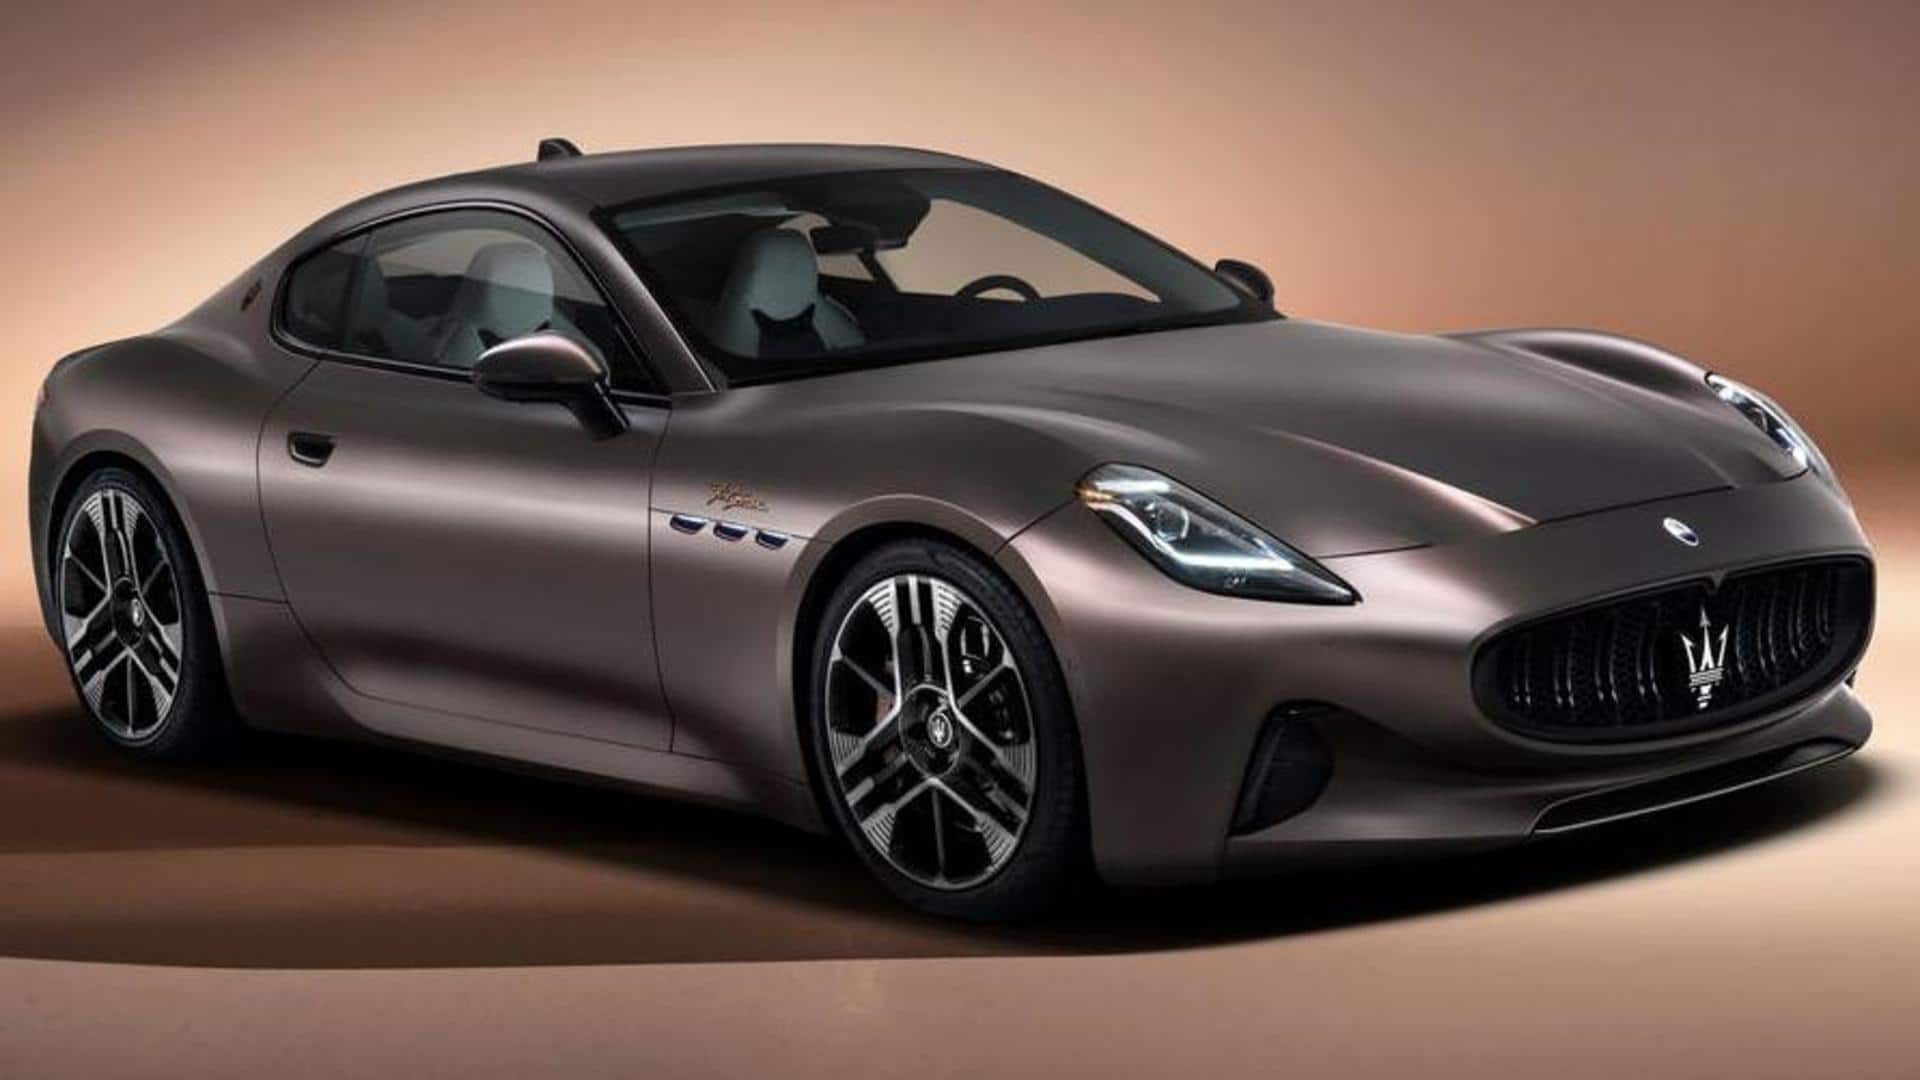 2023 Maserati GranTurismo, with stylish looks and new features, revealed